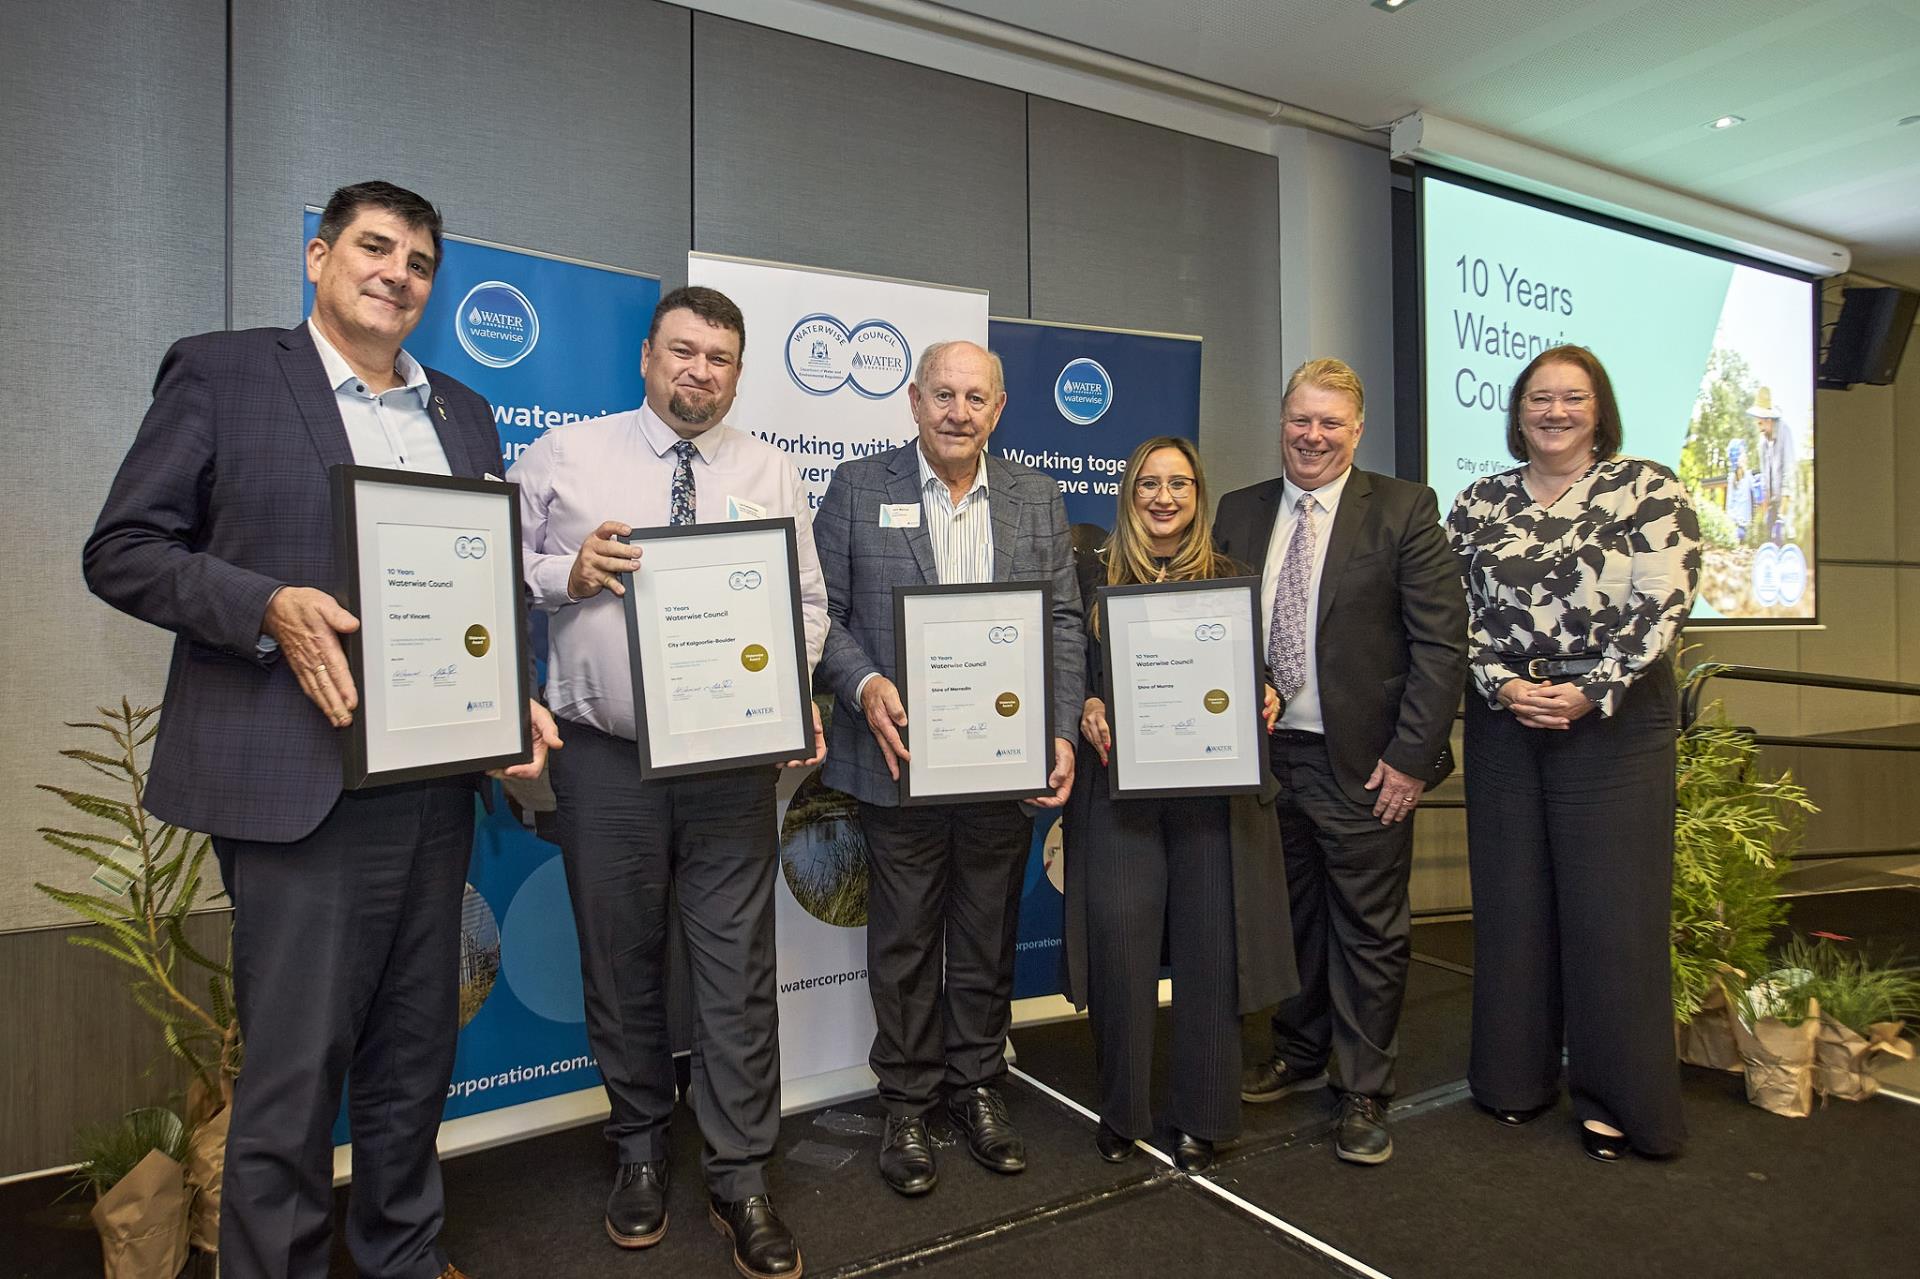 City recognised for a decade of sustainable water management